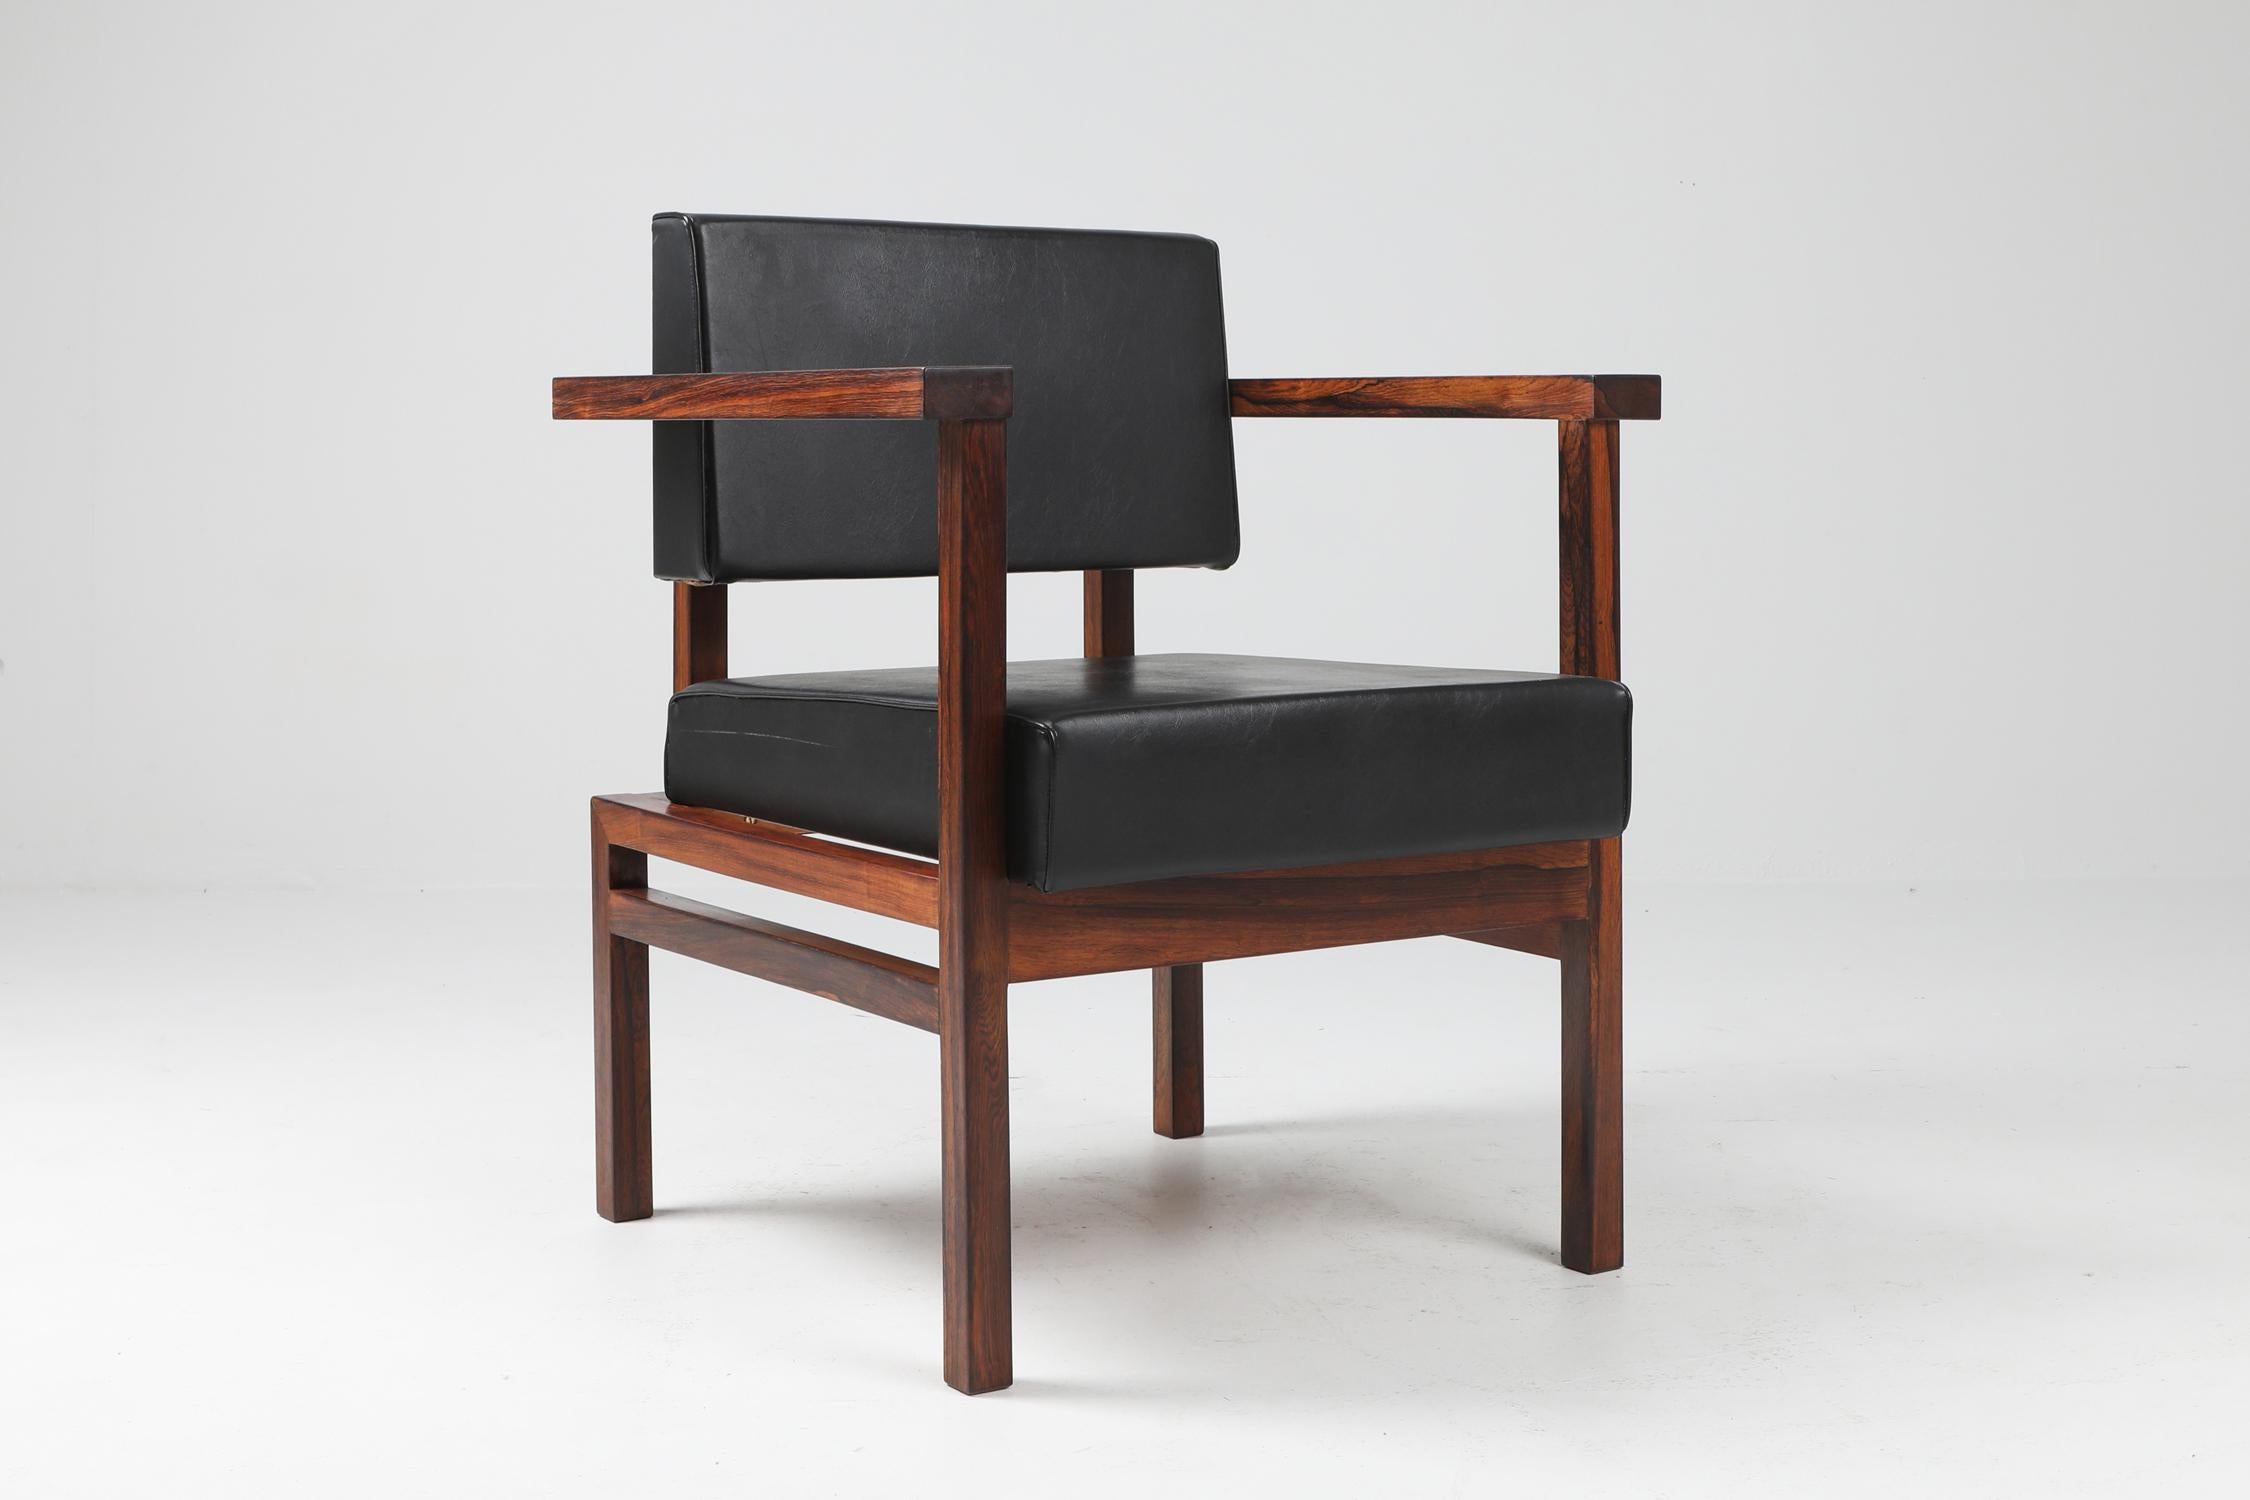 Black executive chair, Wim Den Boon, the Netherlands, the 1950s.
Wim Den Boon formed 'Groep &' just after the liberation of The Netherlands in 1945 together with Hein Stolle & P. Kleykamp.
'Goed Wonen' designer Wim Den Boon holds a key position in